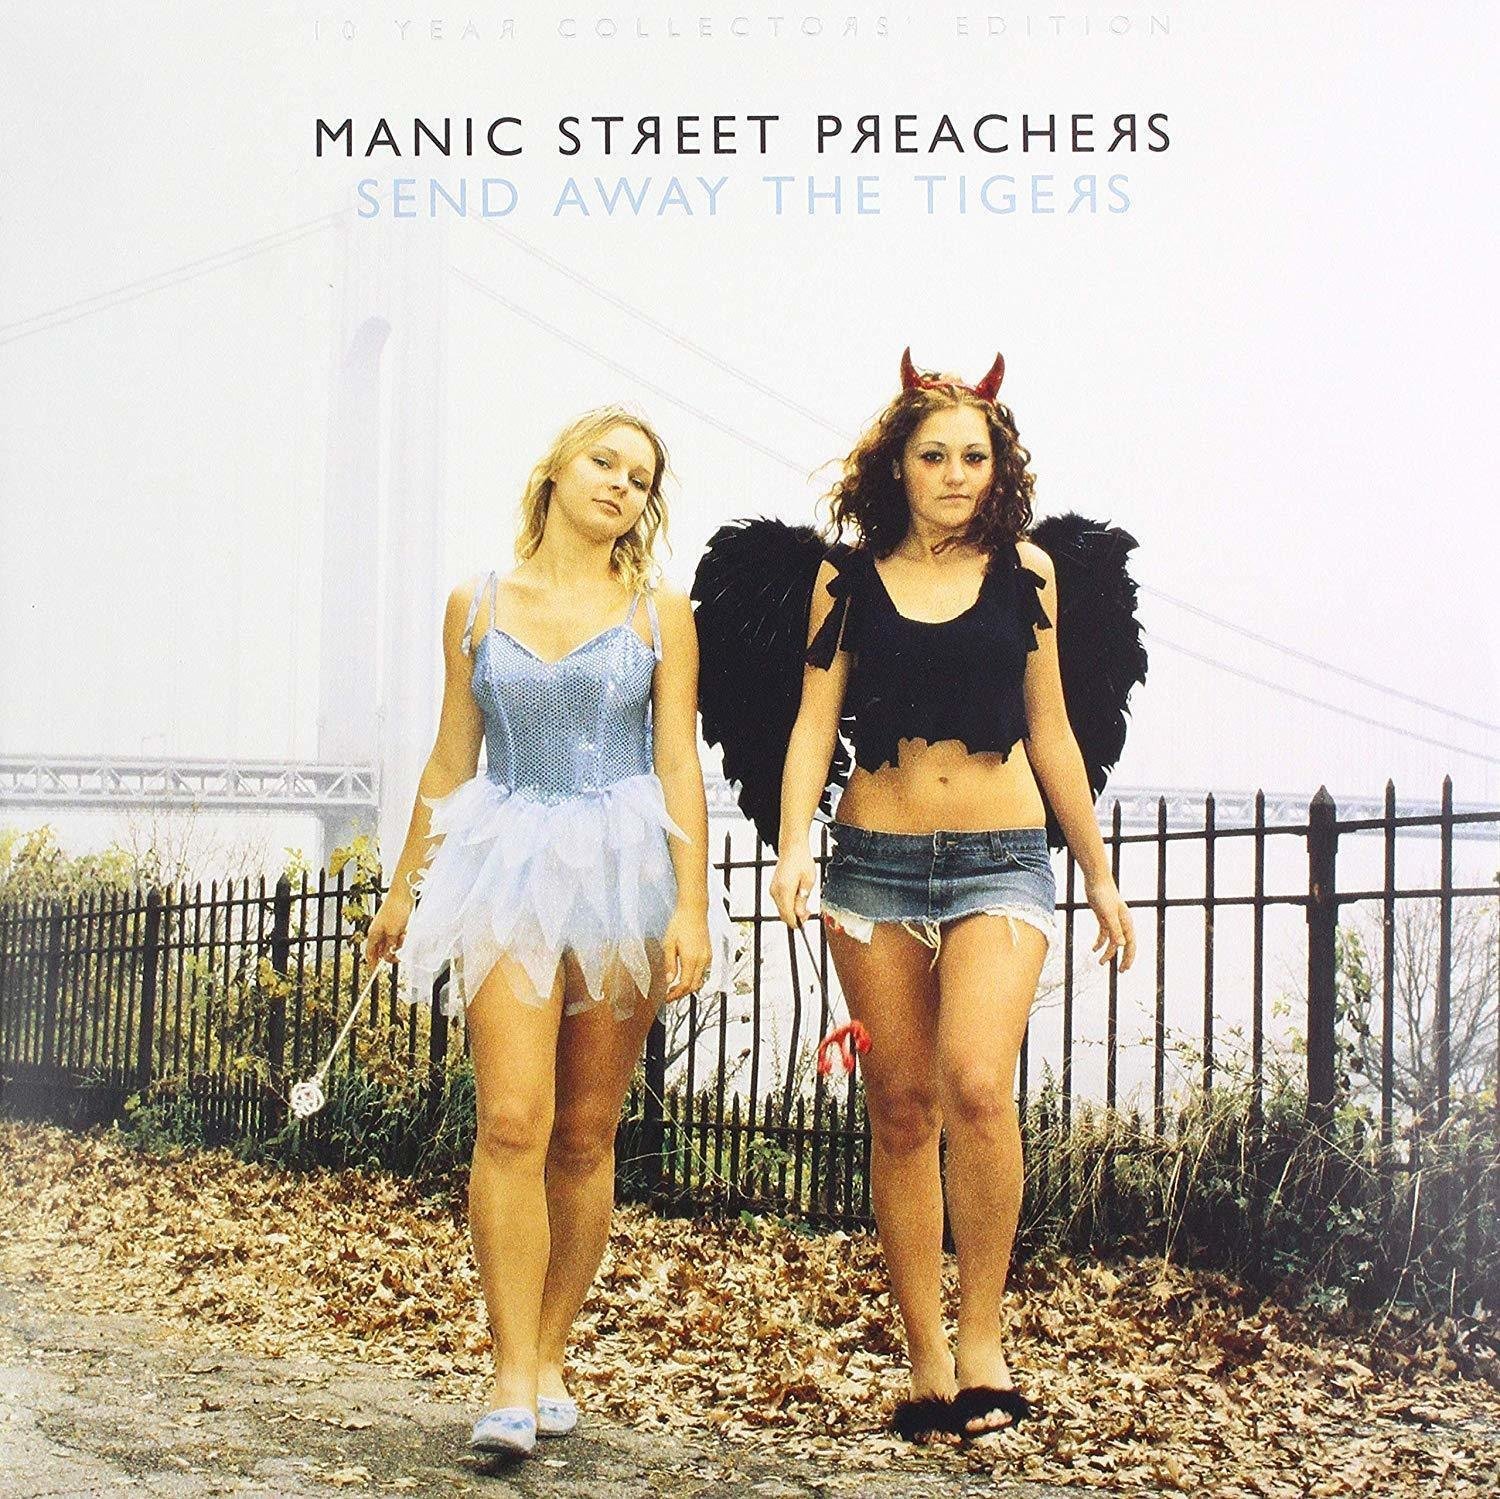 Vinyl Record Manic Street Preachers Send Away the Tigers - 10 Years Collectors' Edition (2 LP)